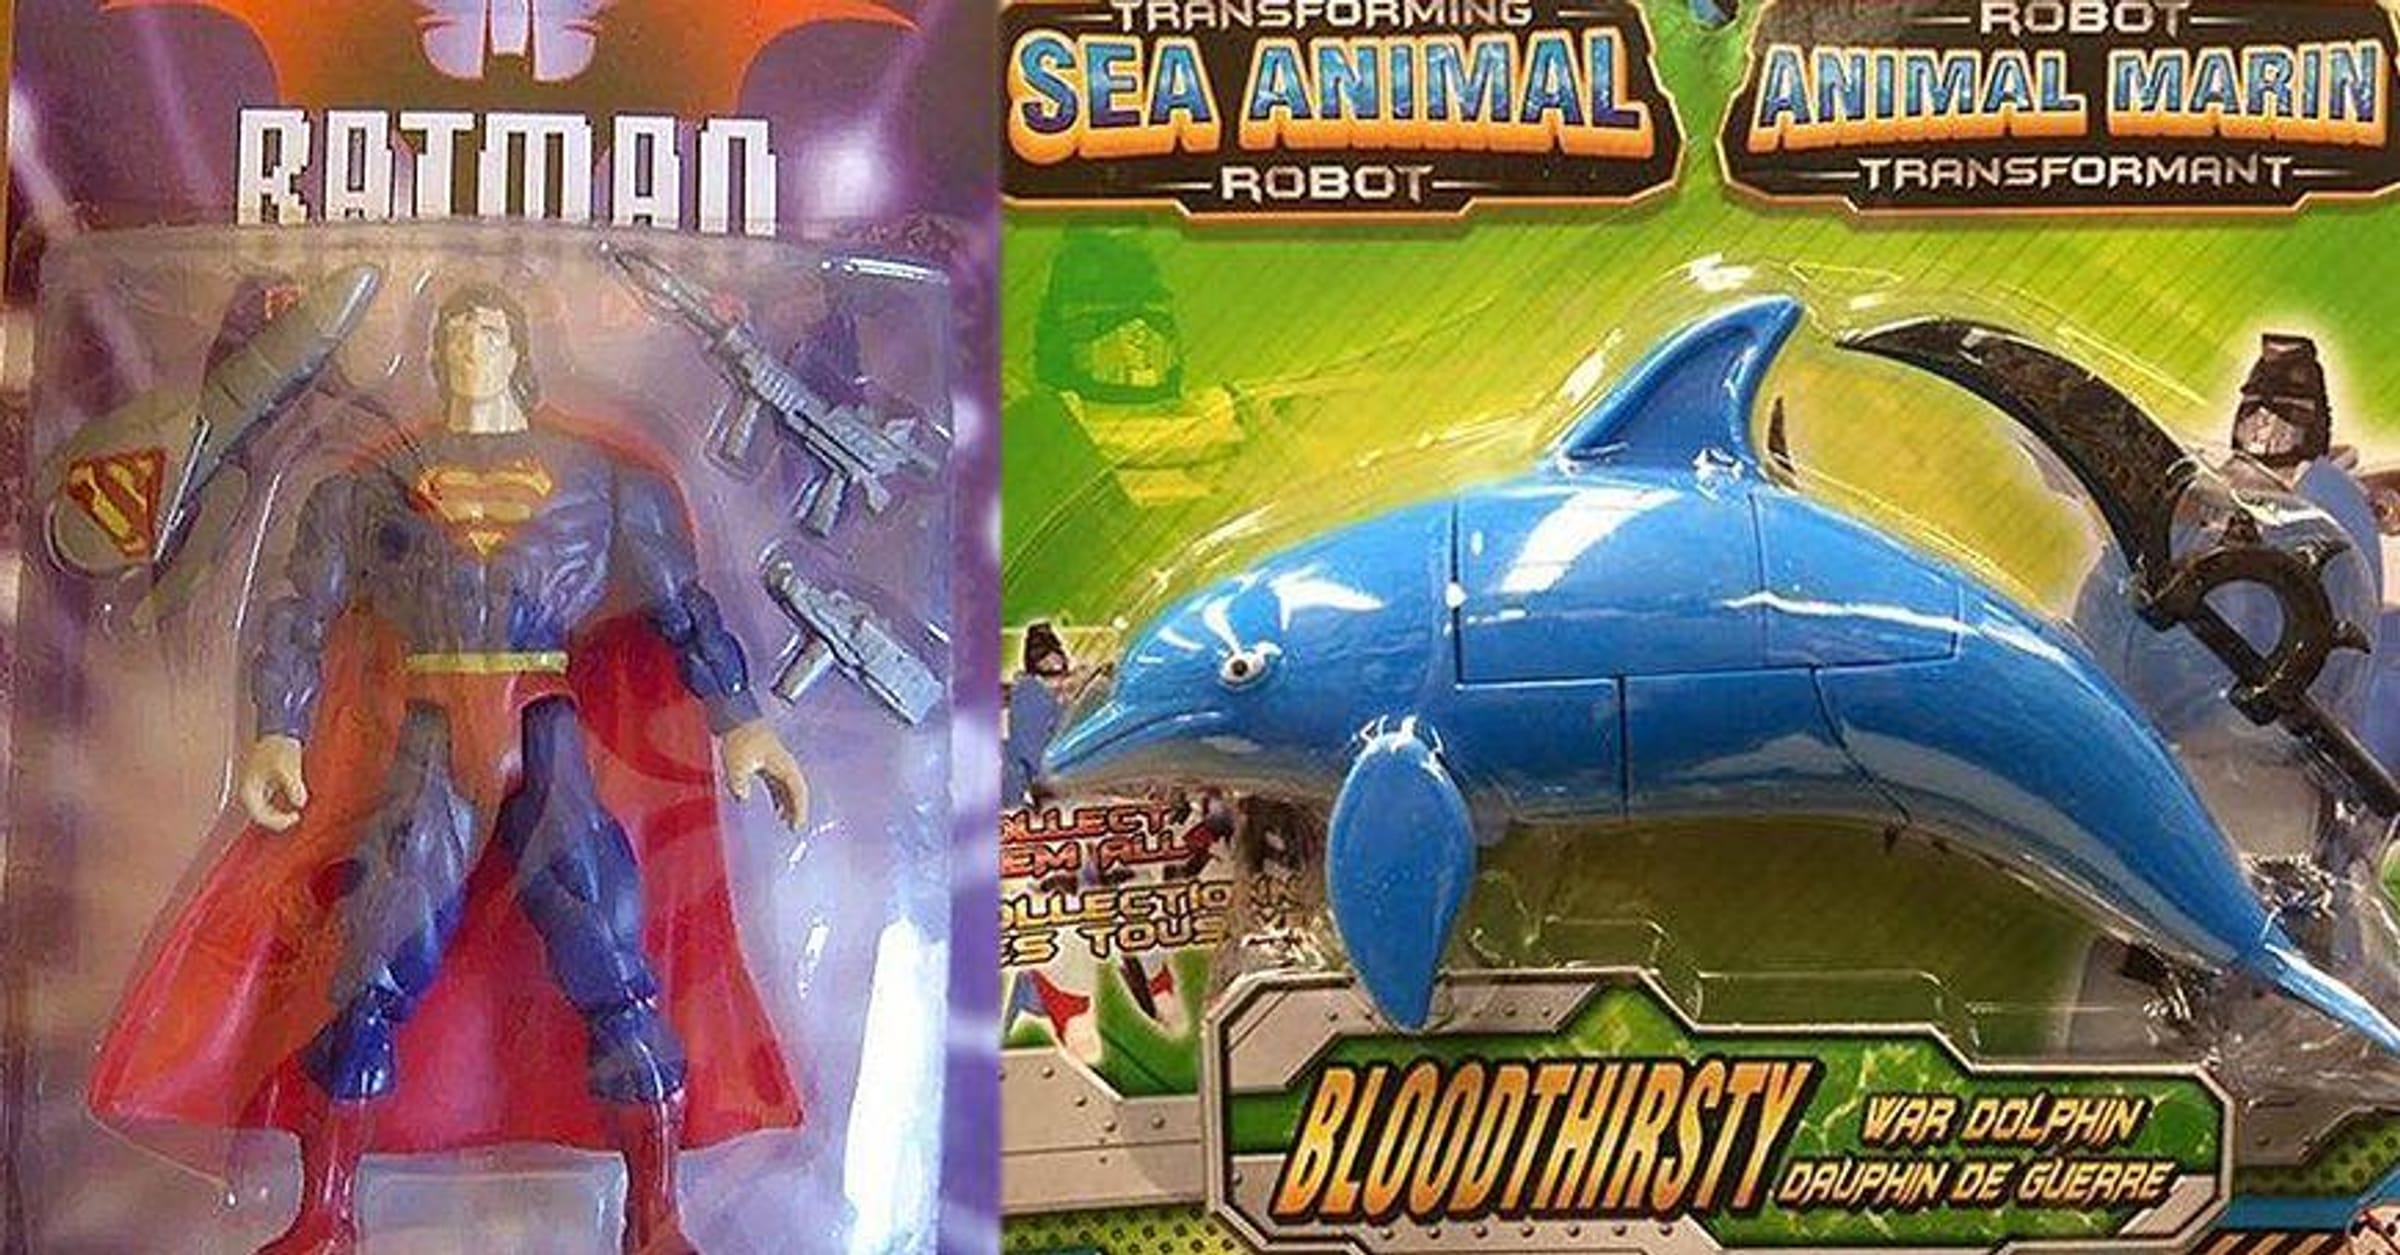 25 Terrible Dollar Store Toys No Kid Would Want